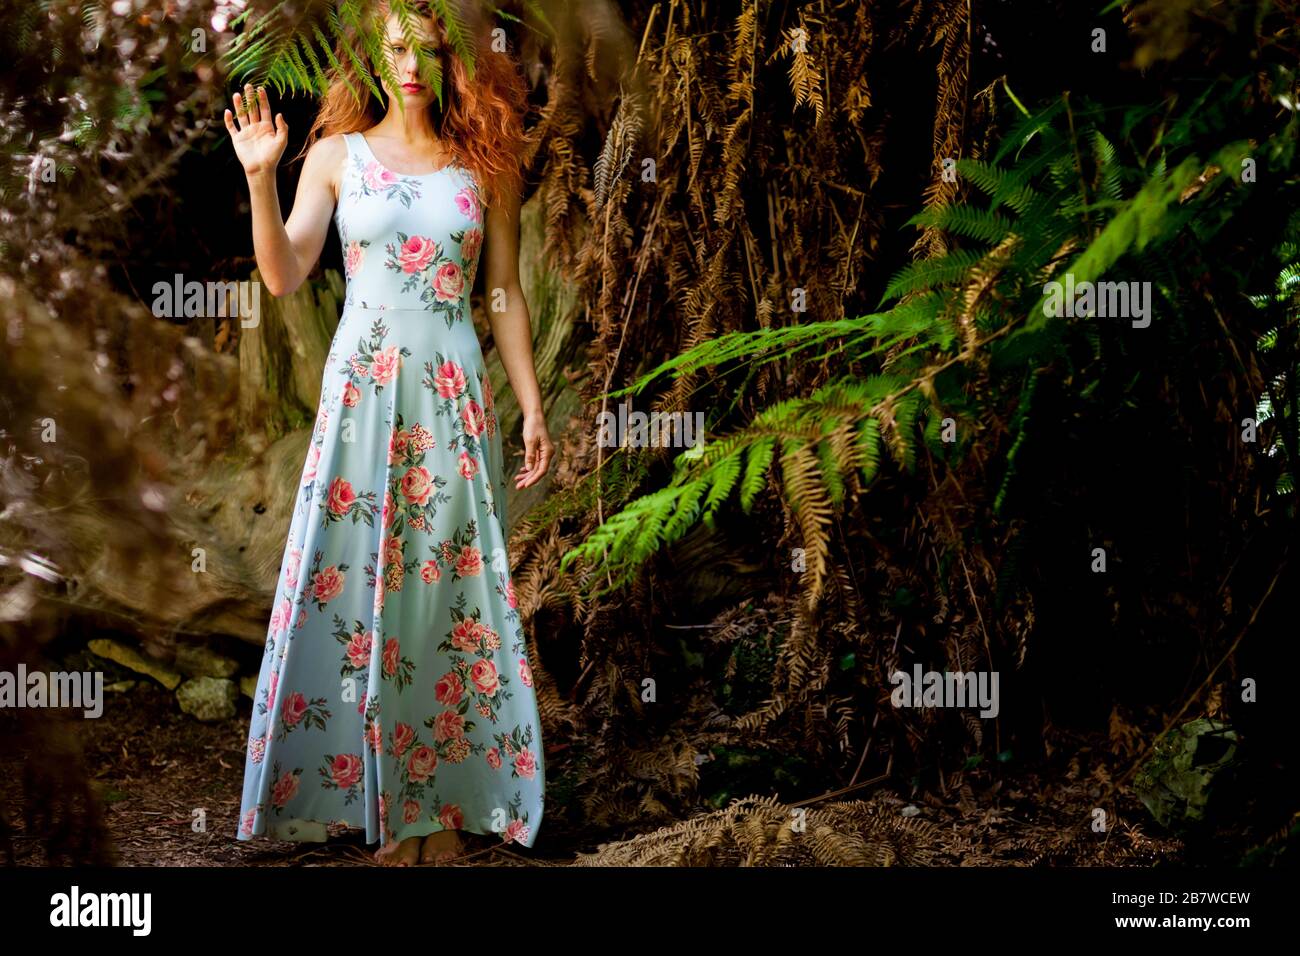 Woman in Floral Dress Standing by Fern Tree in Forest Stock Photo